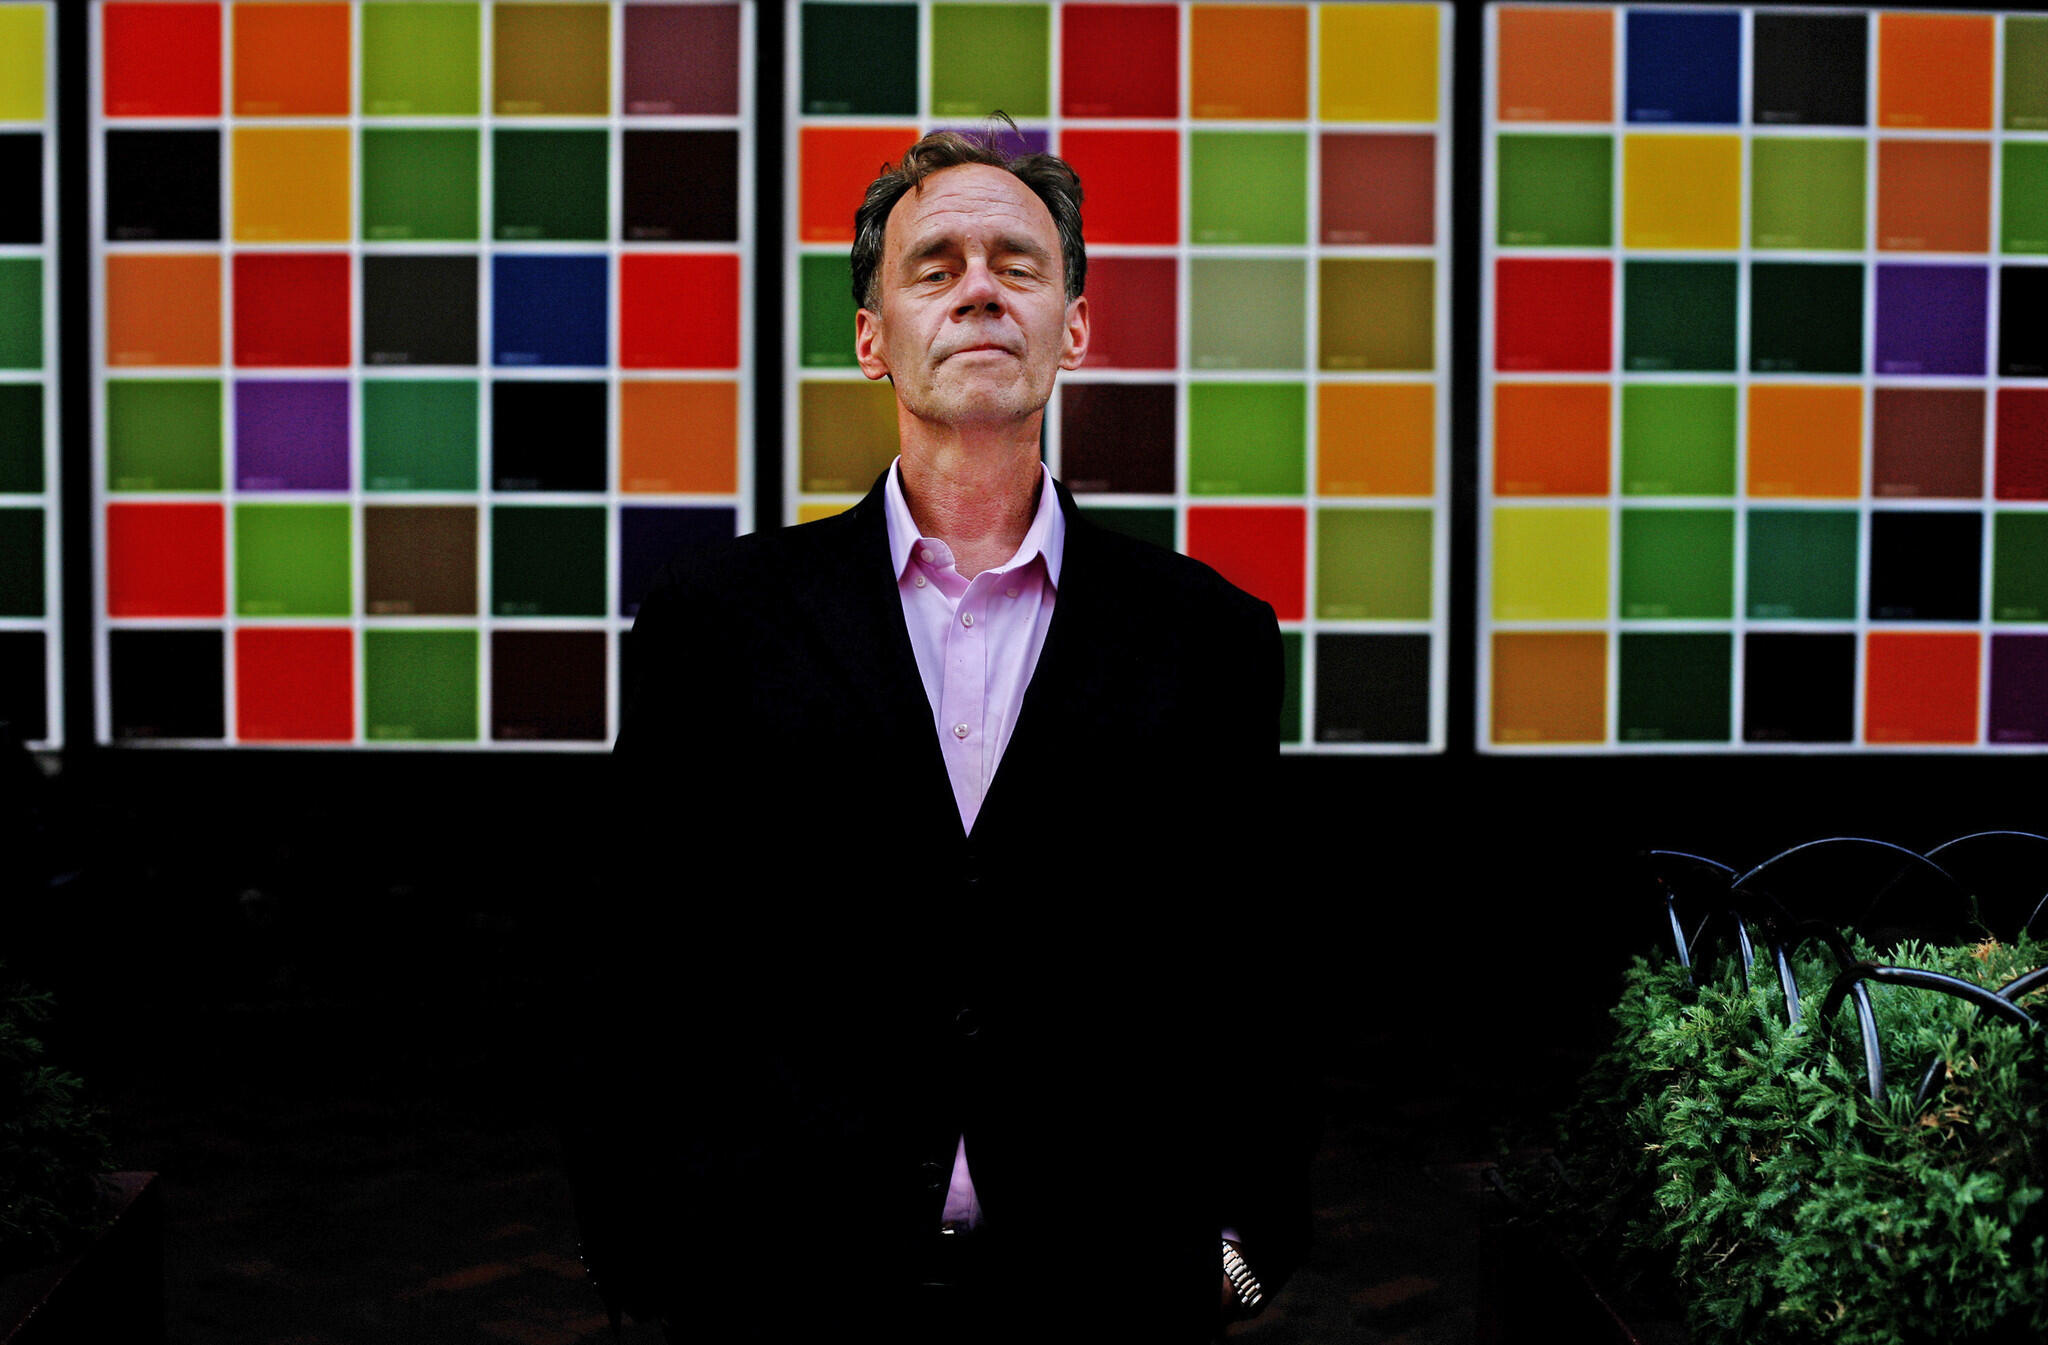 David Carr, culture reporter and media columnist for The New York Times poses for a photograph on Eighth Avenue, in New York.